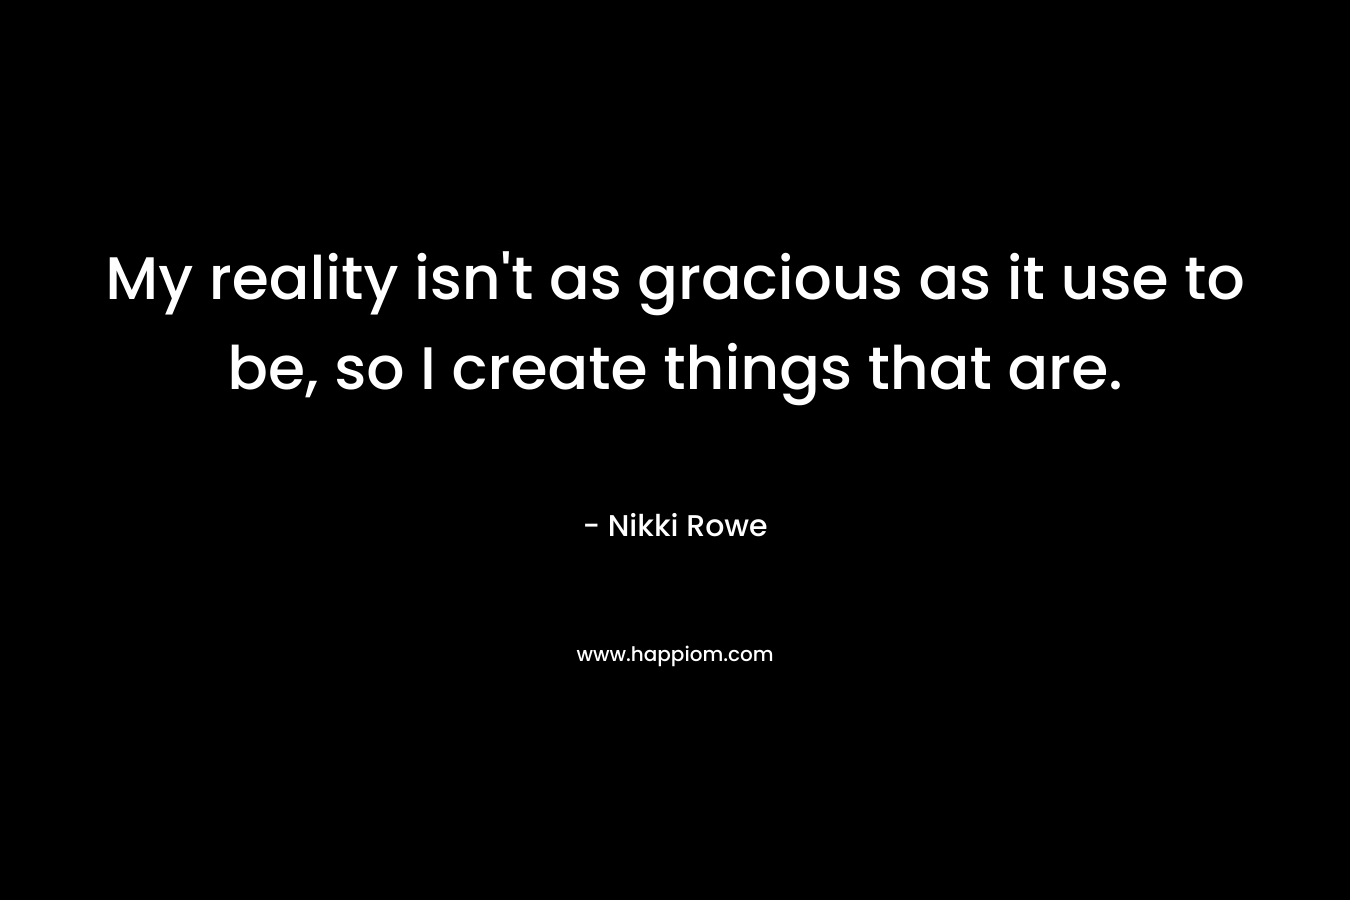 My reality isn’t as gracious as it use to be, so I create things that are. – Nikki Rowe